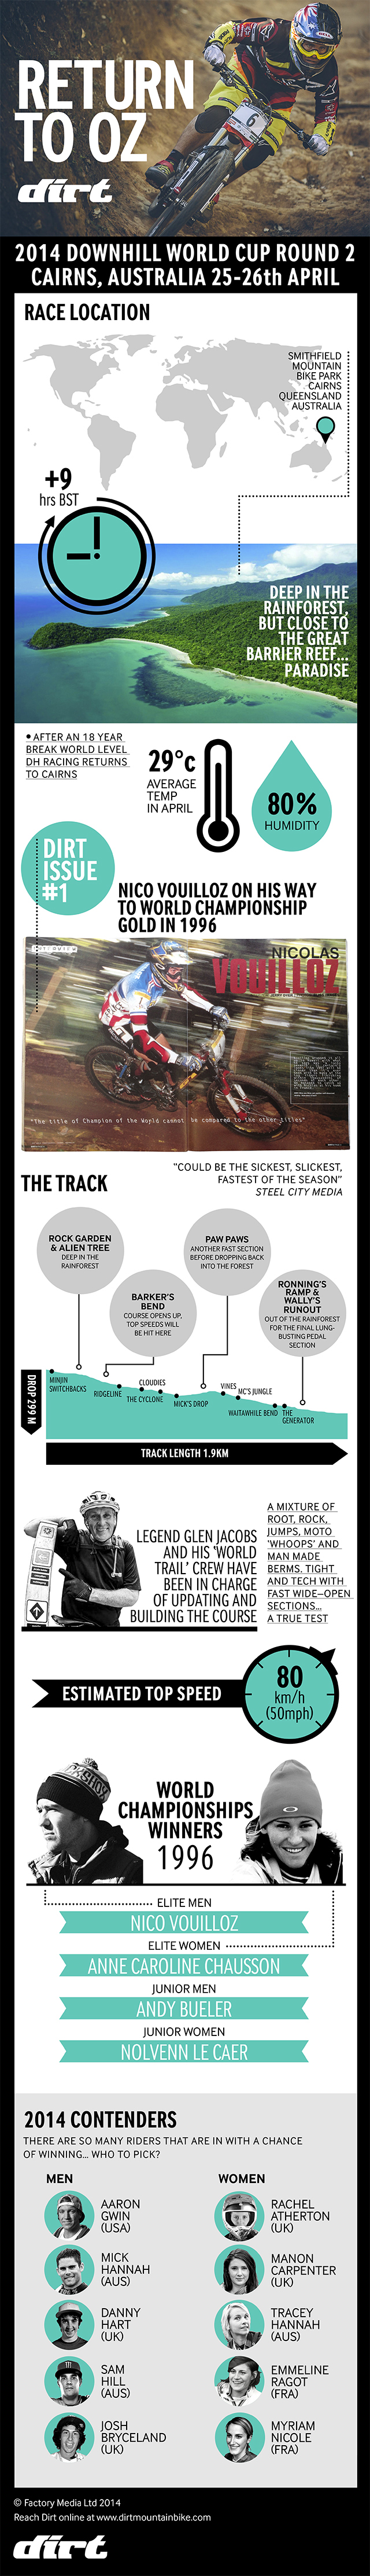 Downhill World Cup 2014 Cairns Infographic Preview